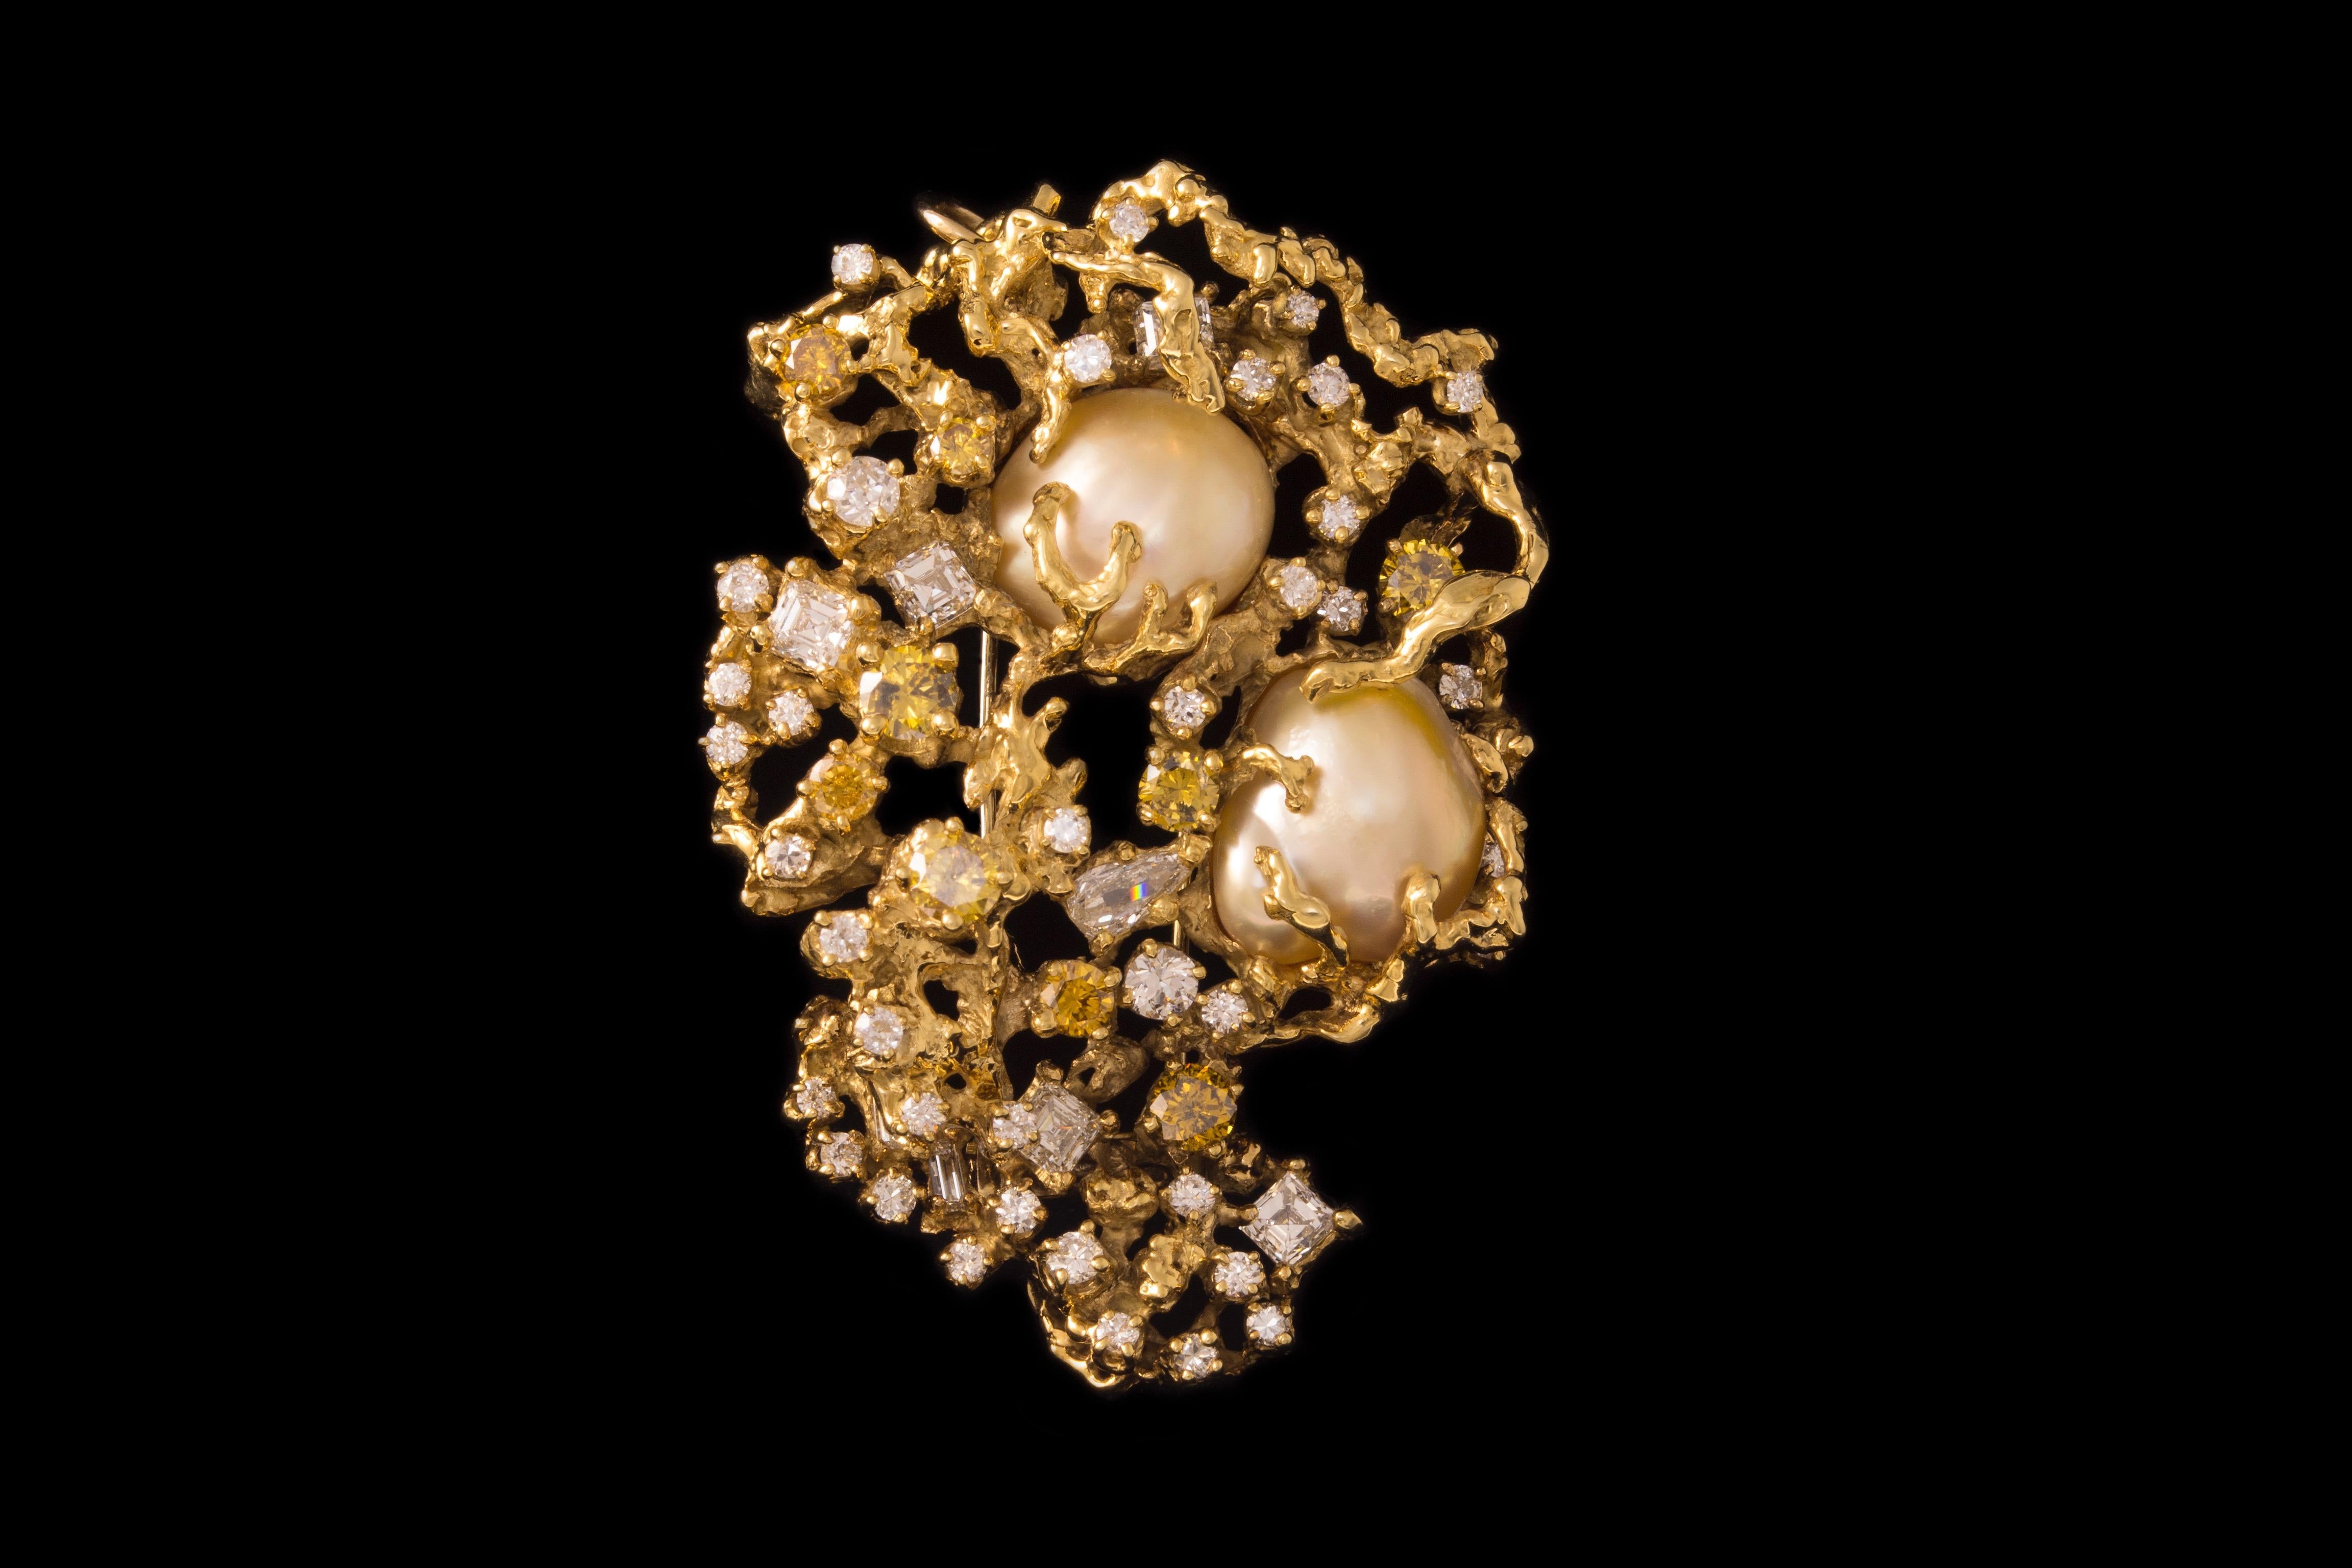 A baroque south sea pearl, white and colored diamonds, and 18 karat gold brooch/pendant, by Arthur King, 1970s. Vintage jewelry. This brooch measures 2.56